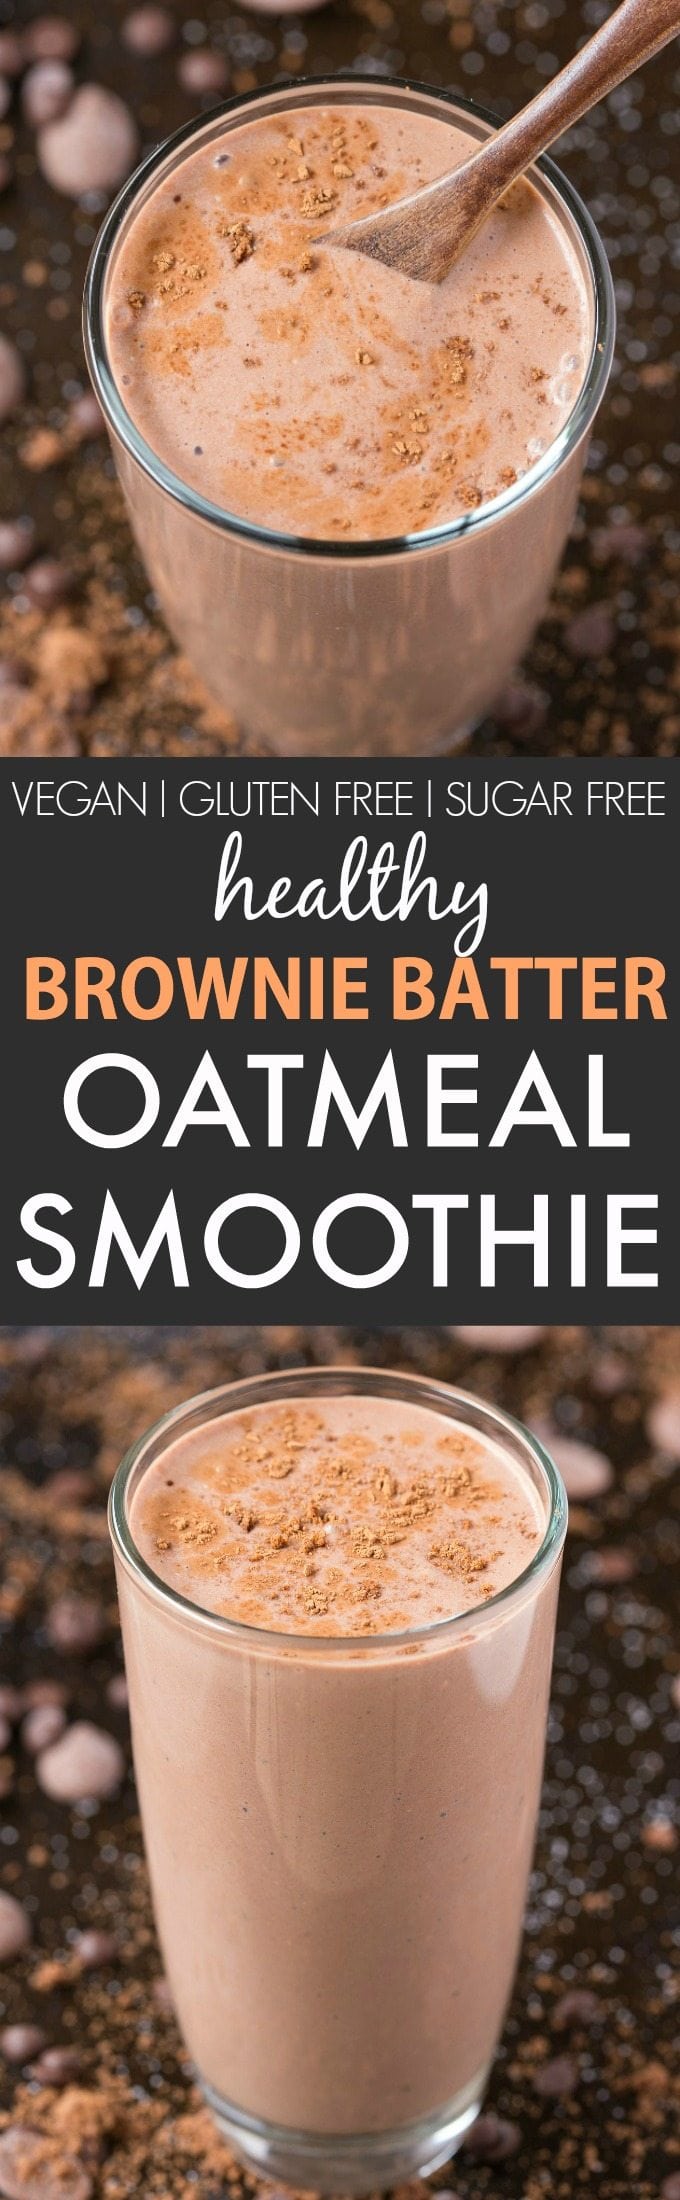 Healthy Brownie Batter Oatmeal Smoothie